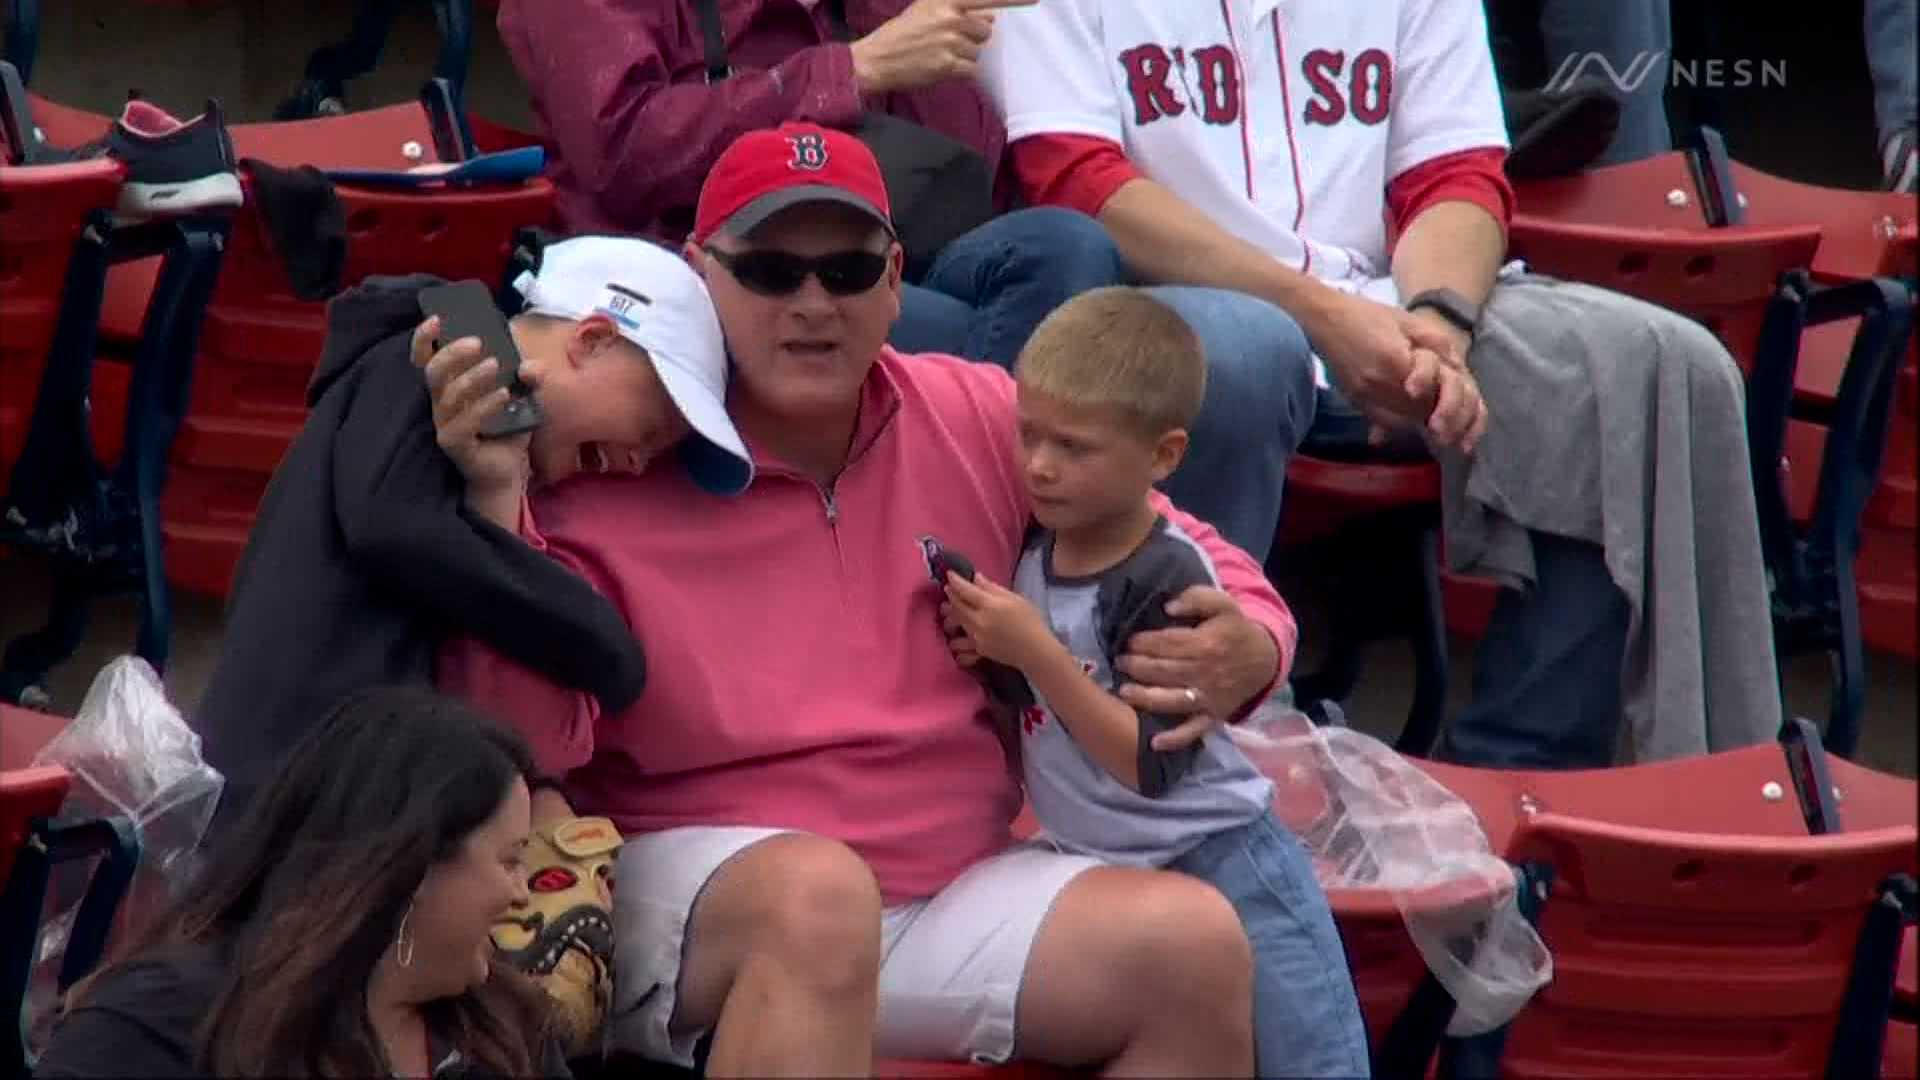 Red Sox: Scenes From Fenway Park at Home Opener – NBC Boston